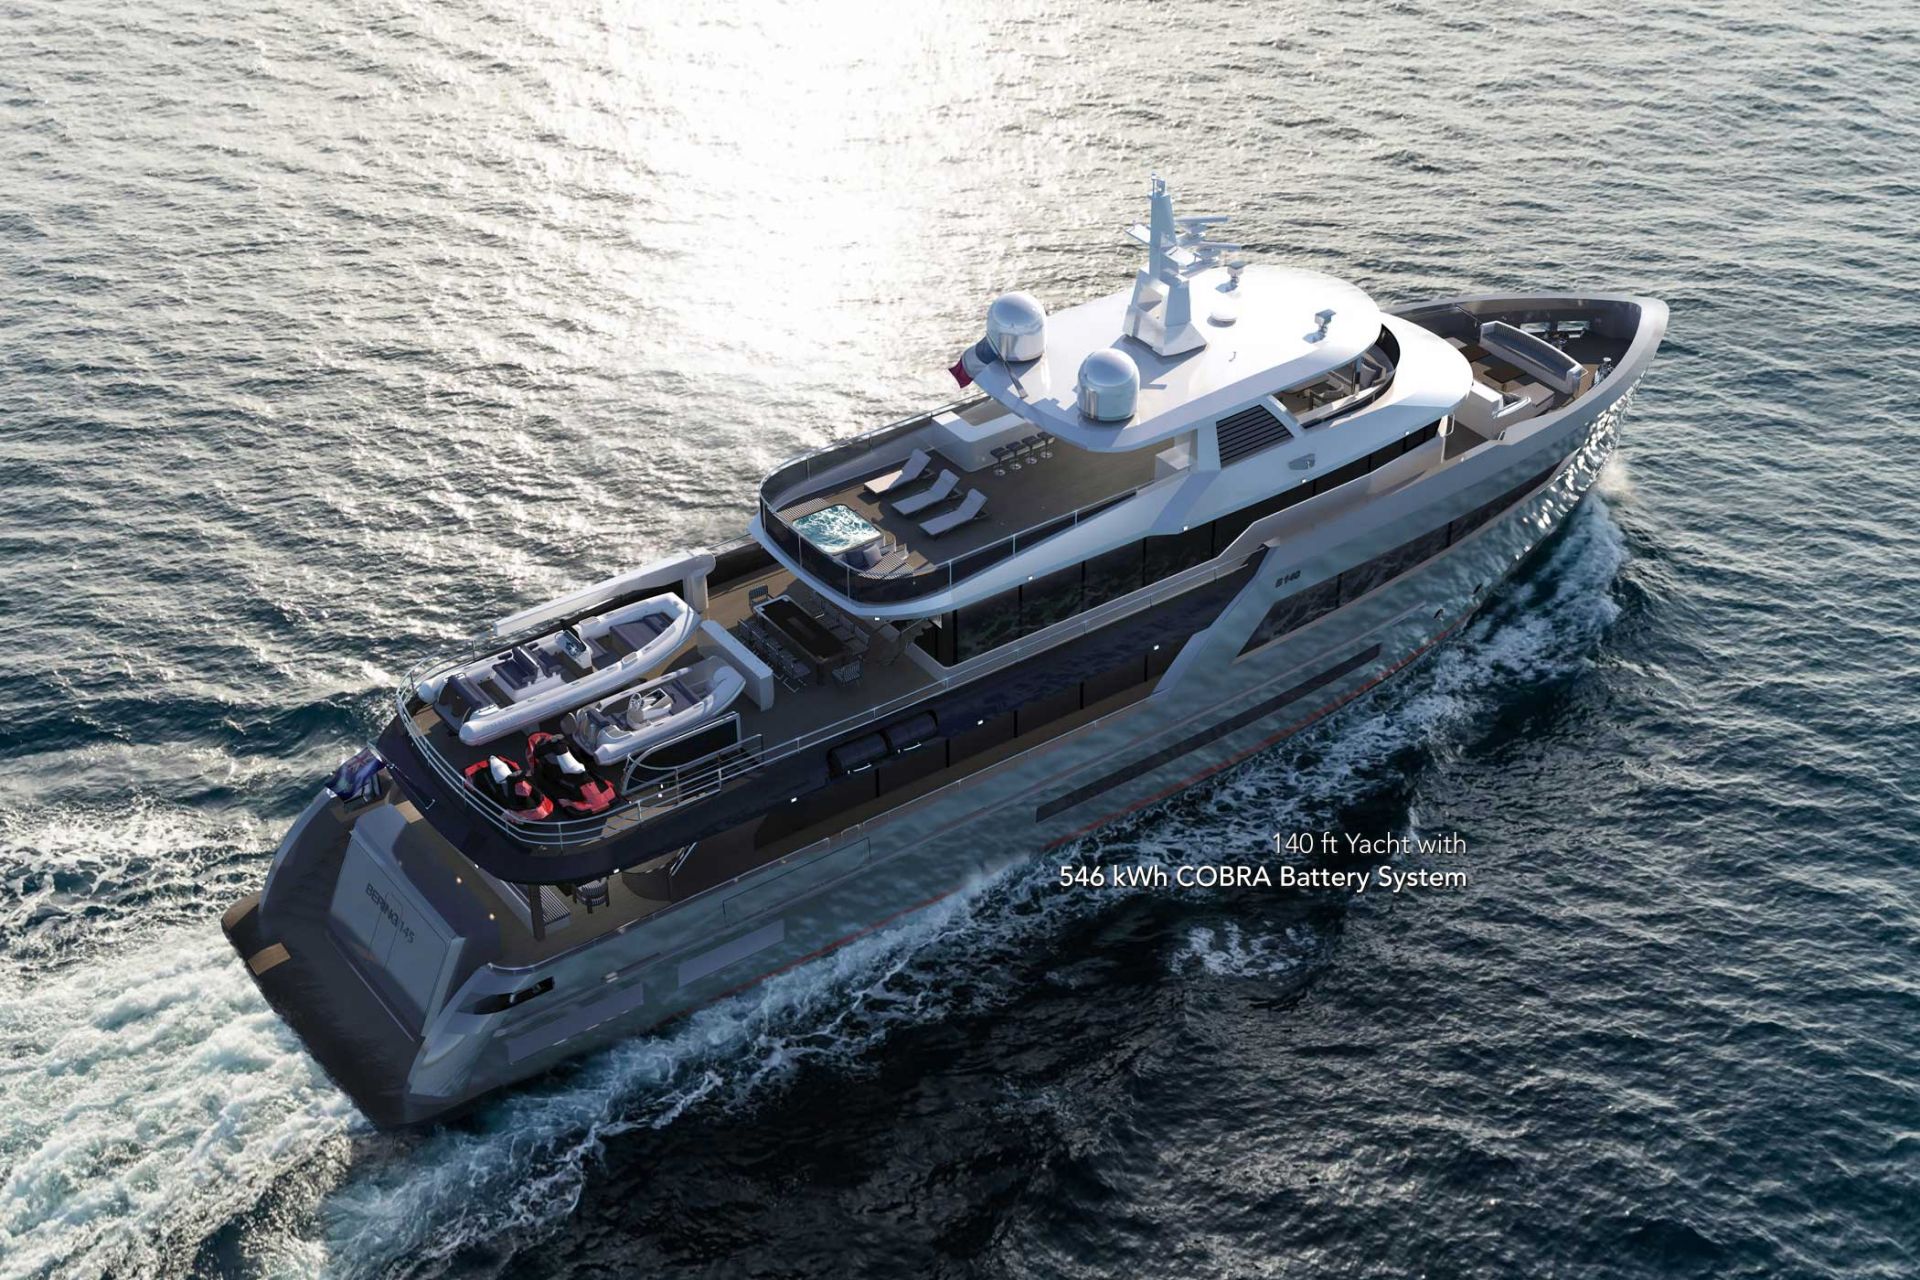 Yacht of 140ft length equipped with a 546 kWh COBRA Battery System